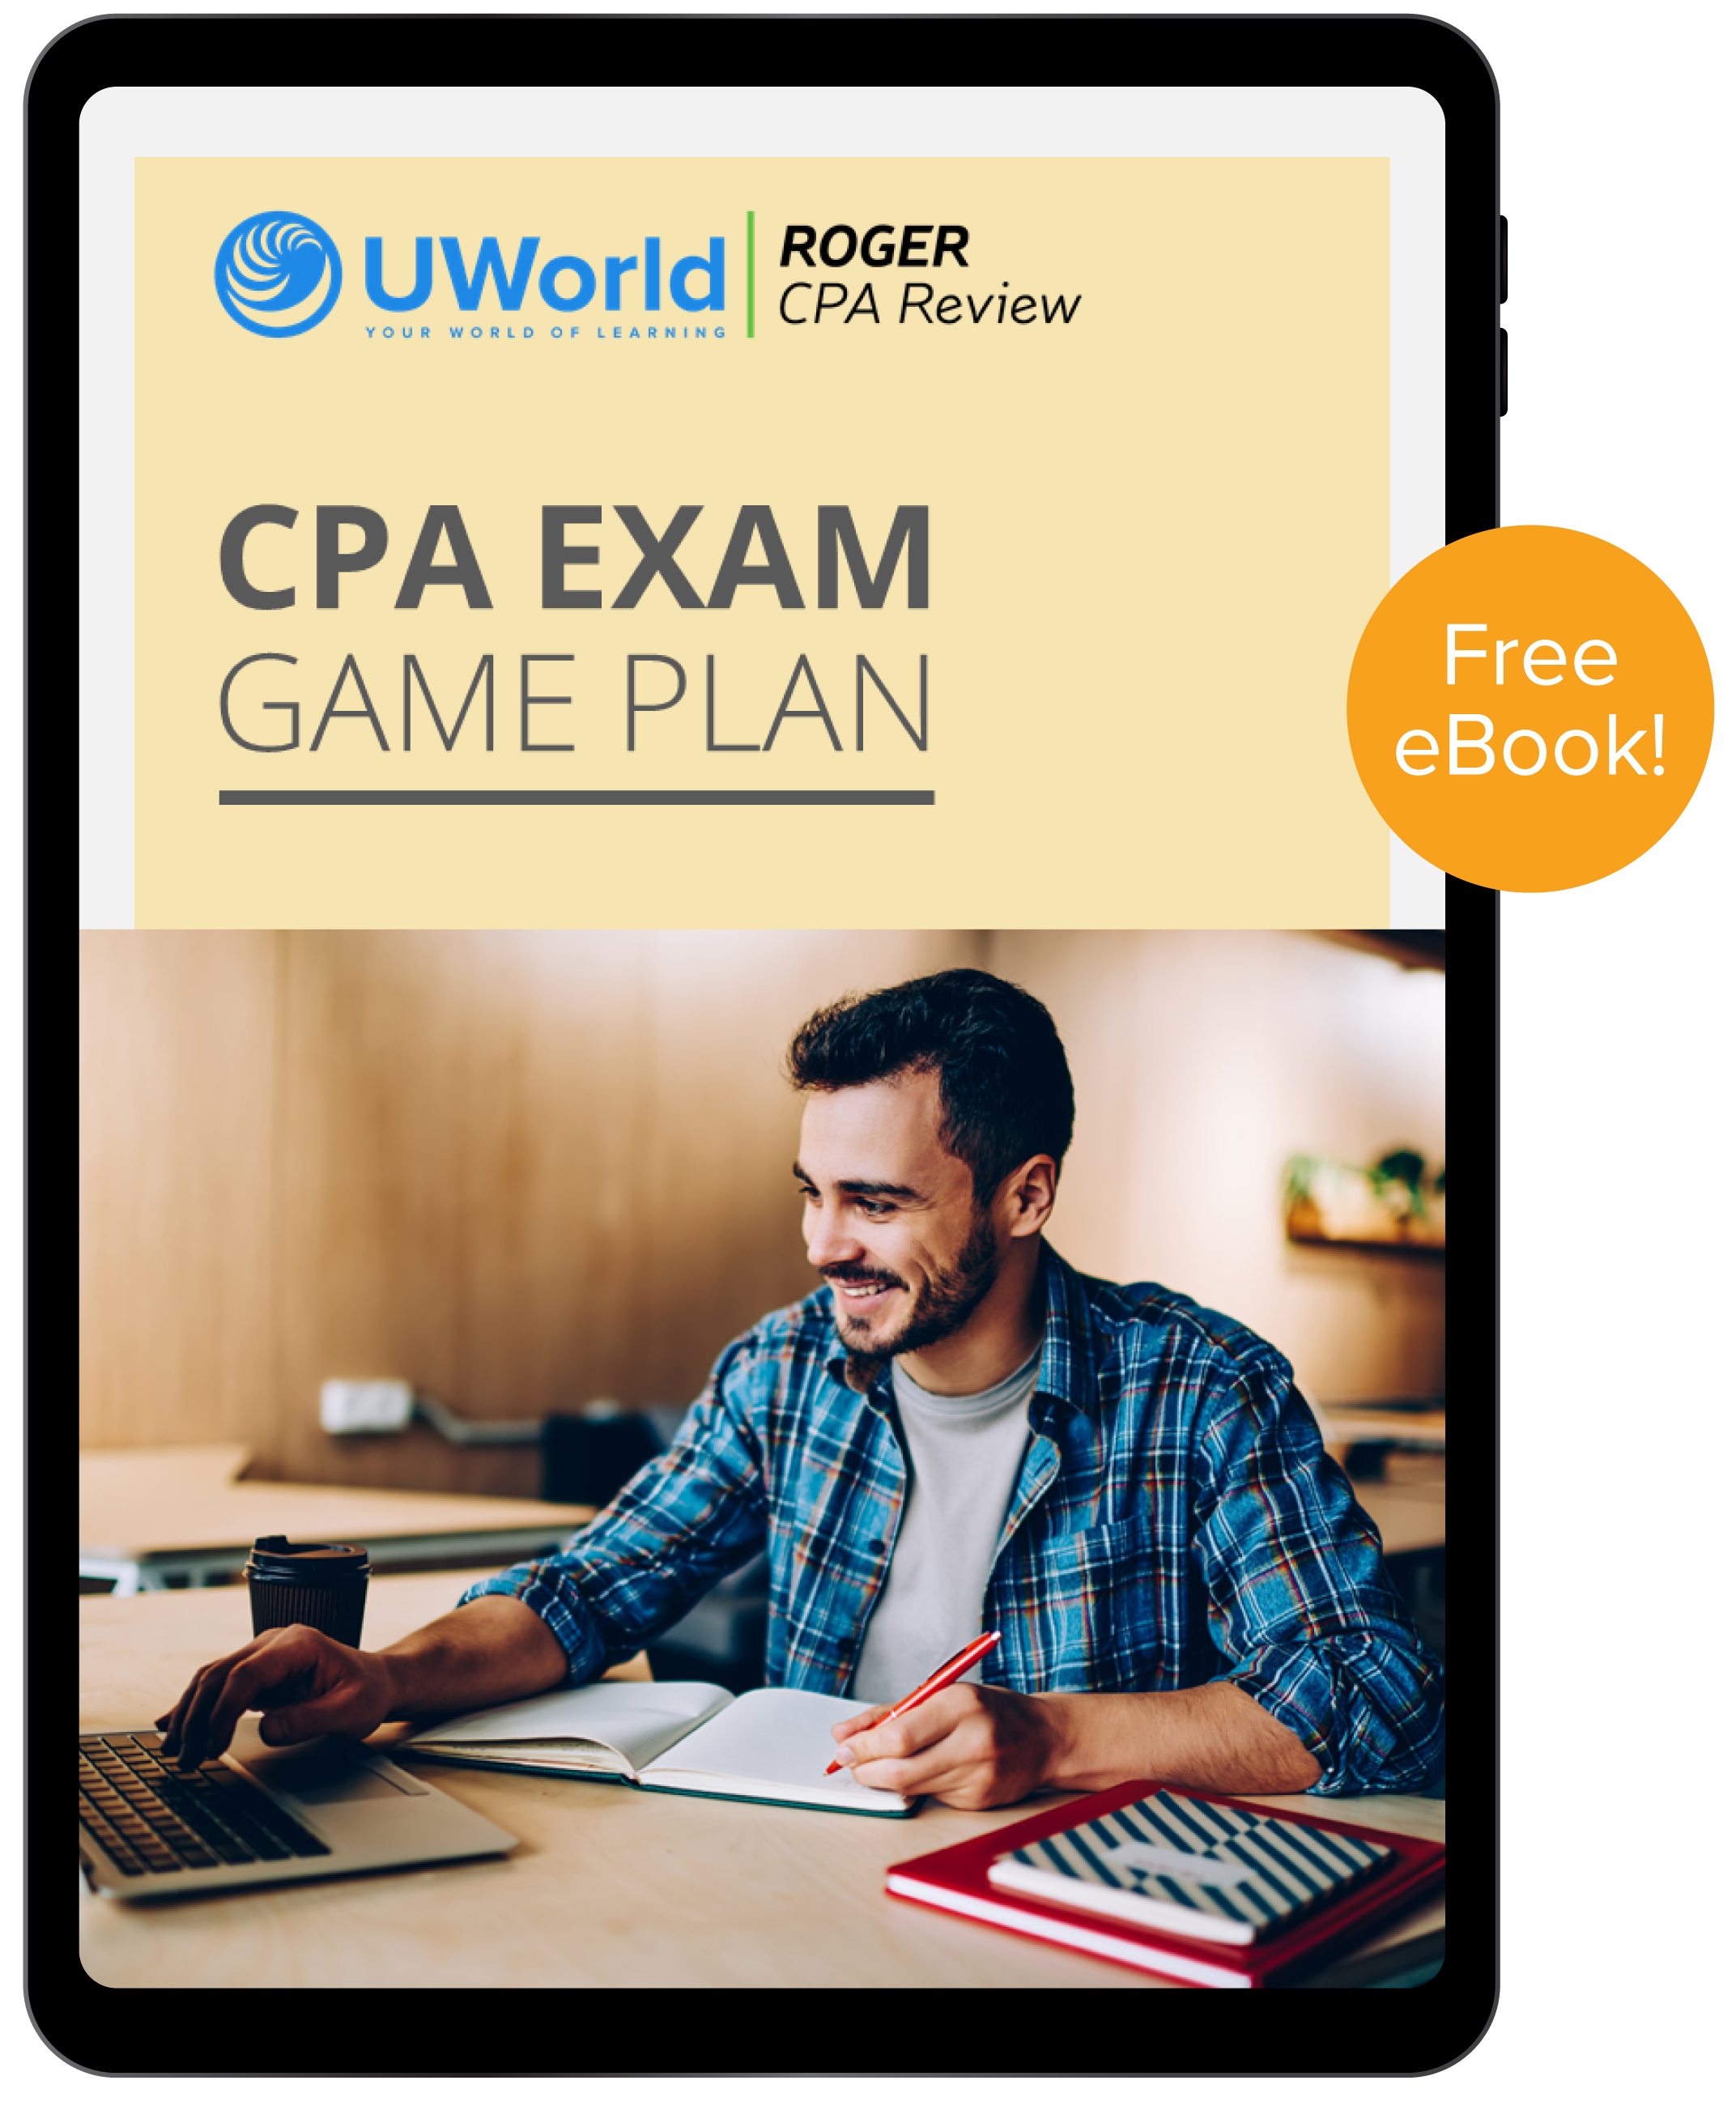 CPA Study Plan Download [Updated for 2021] | UWorld Roger CPA Review